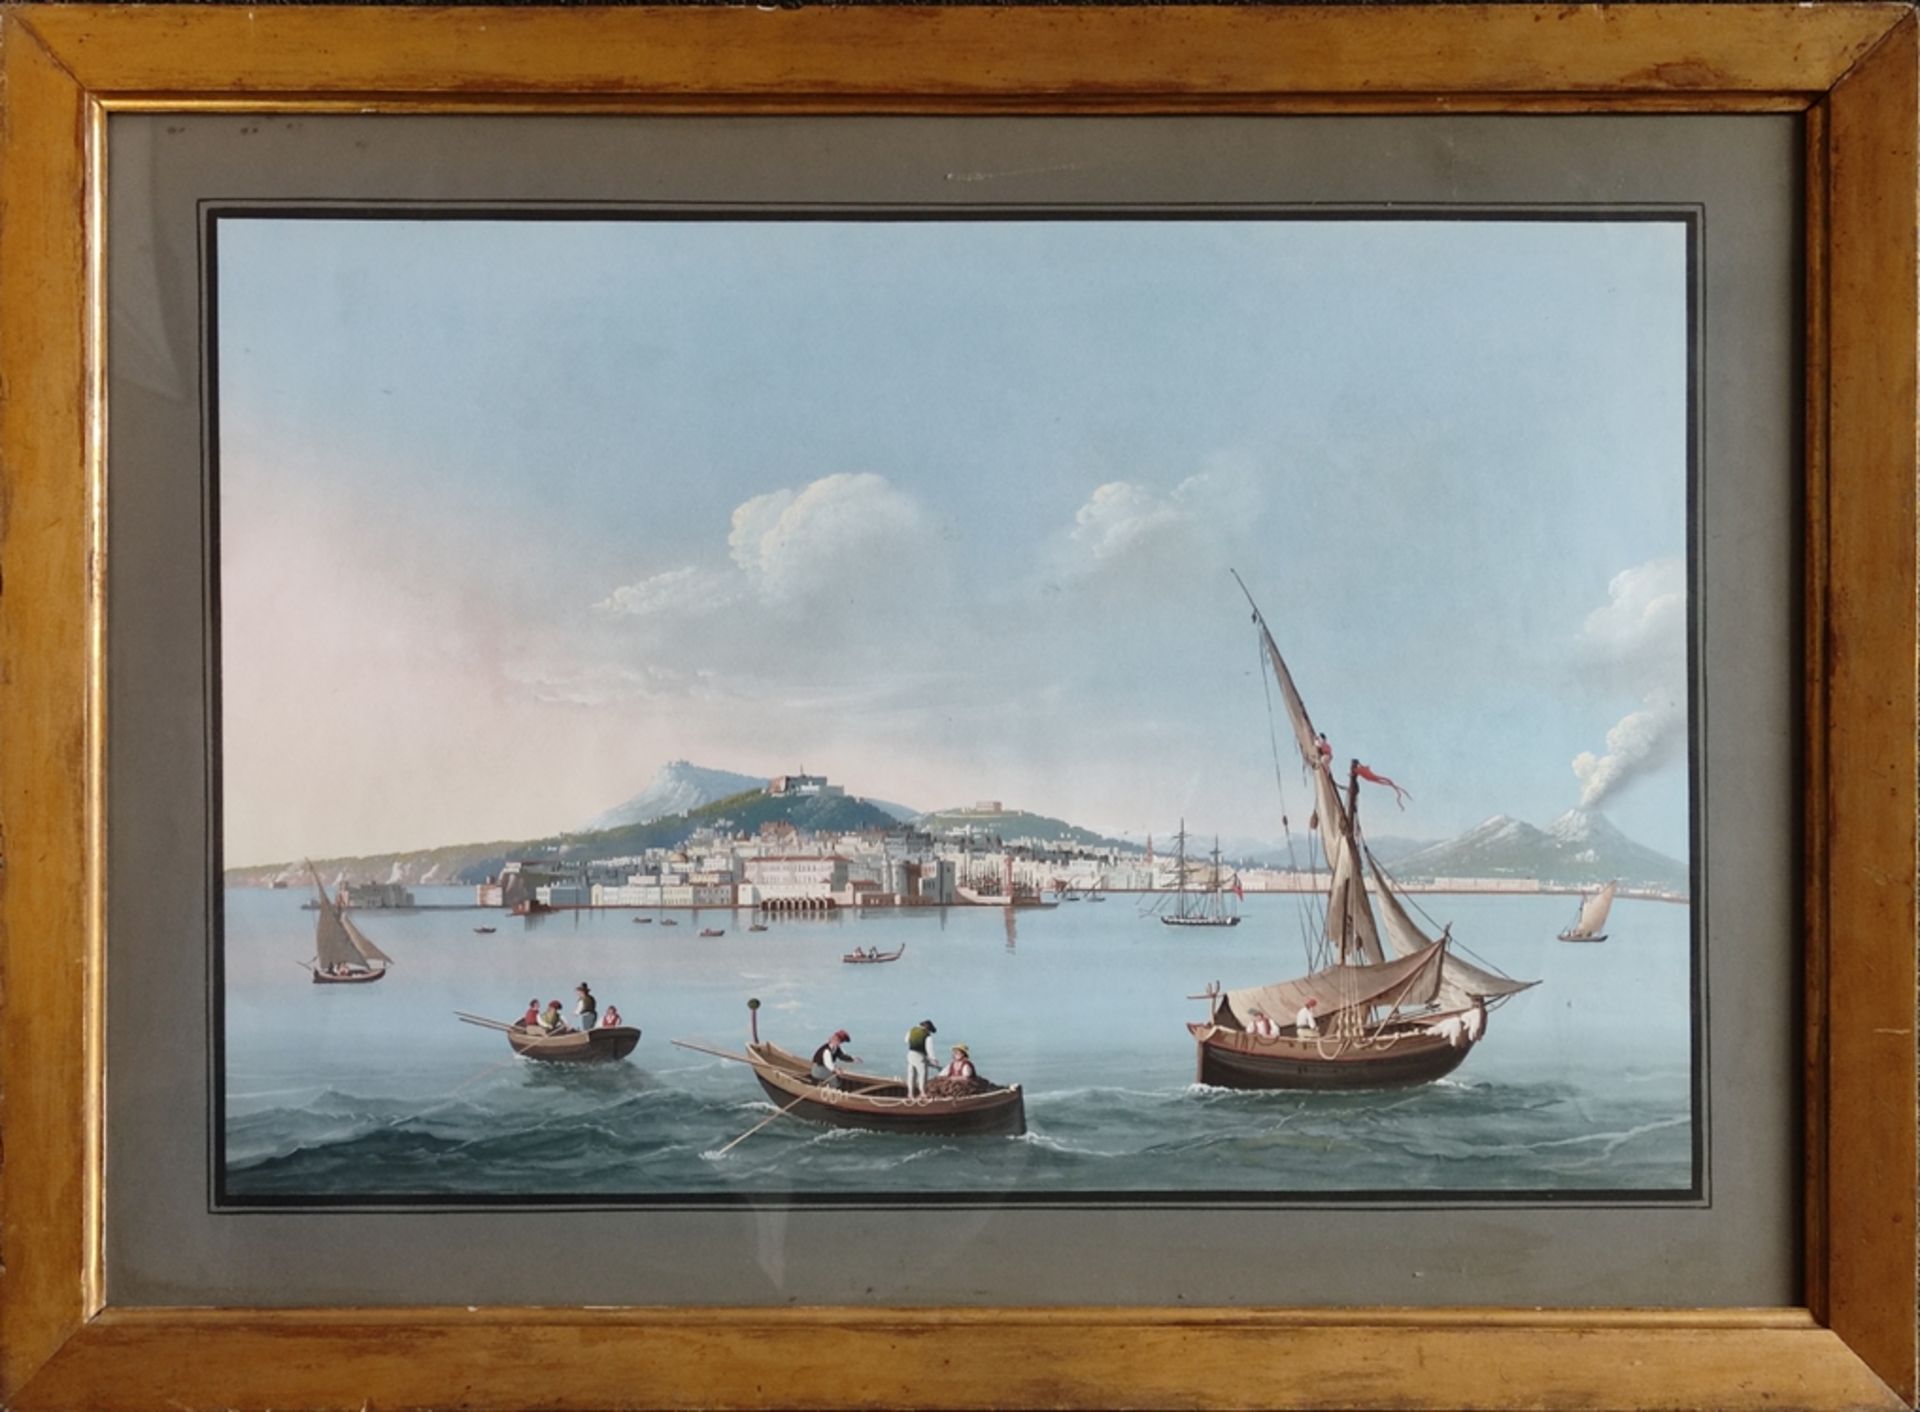 Neapolitan School (19th century) "Eruption of Vesuvius", with view of Naples and lively activity in - Image 2 of 3